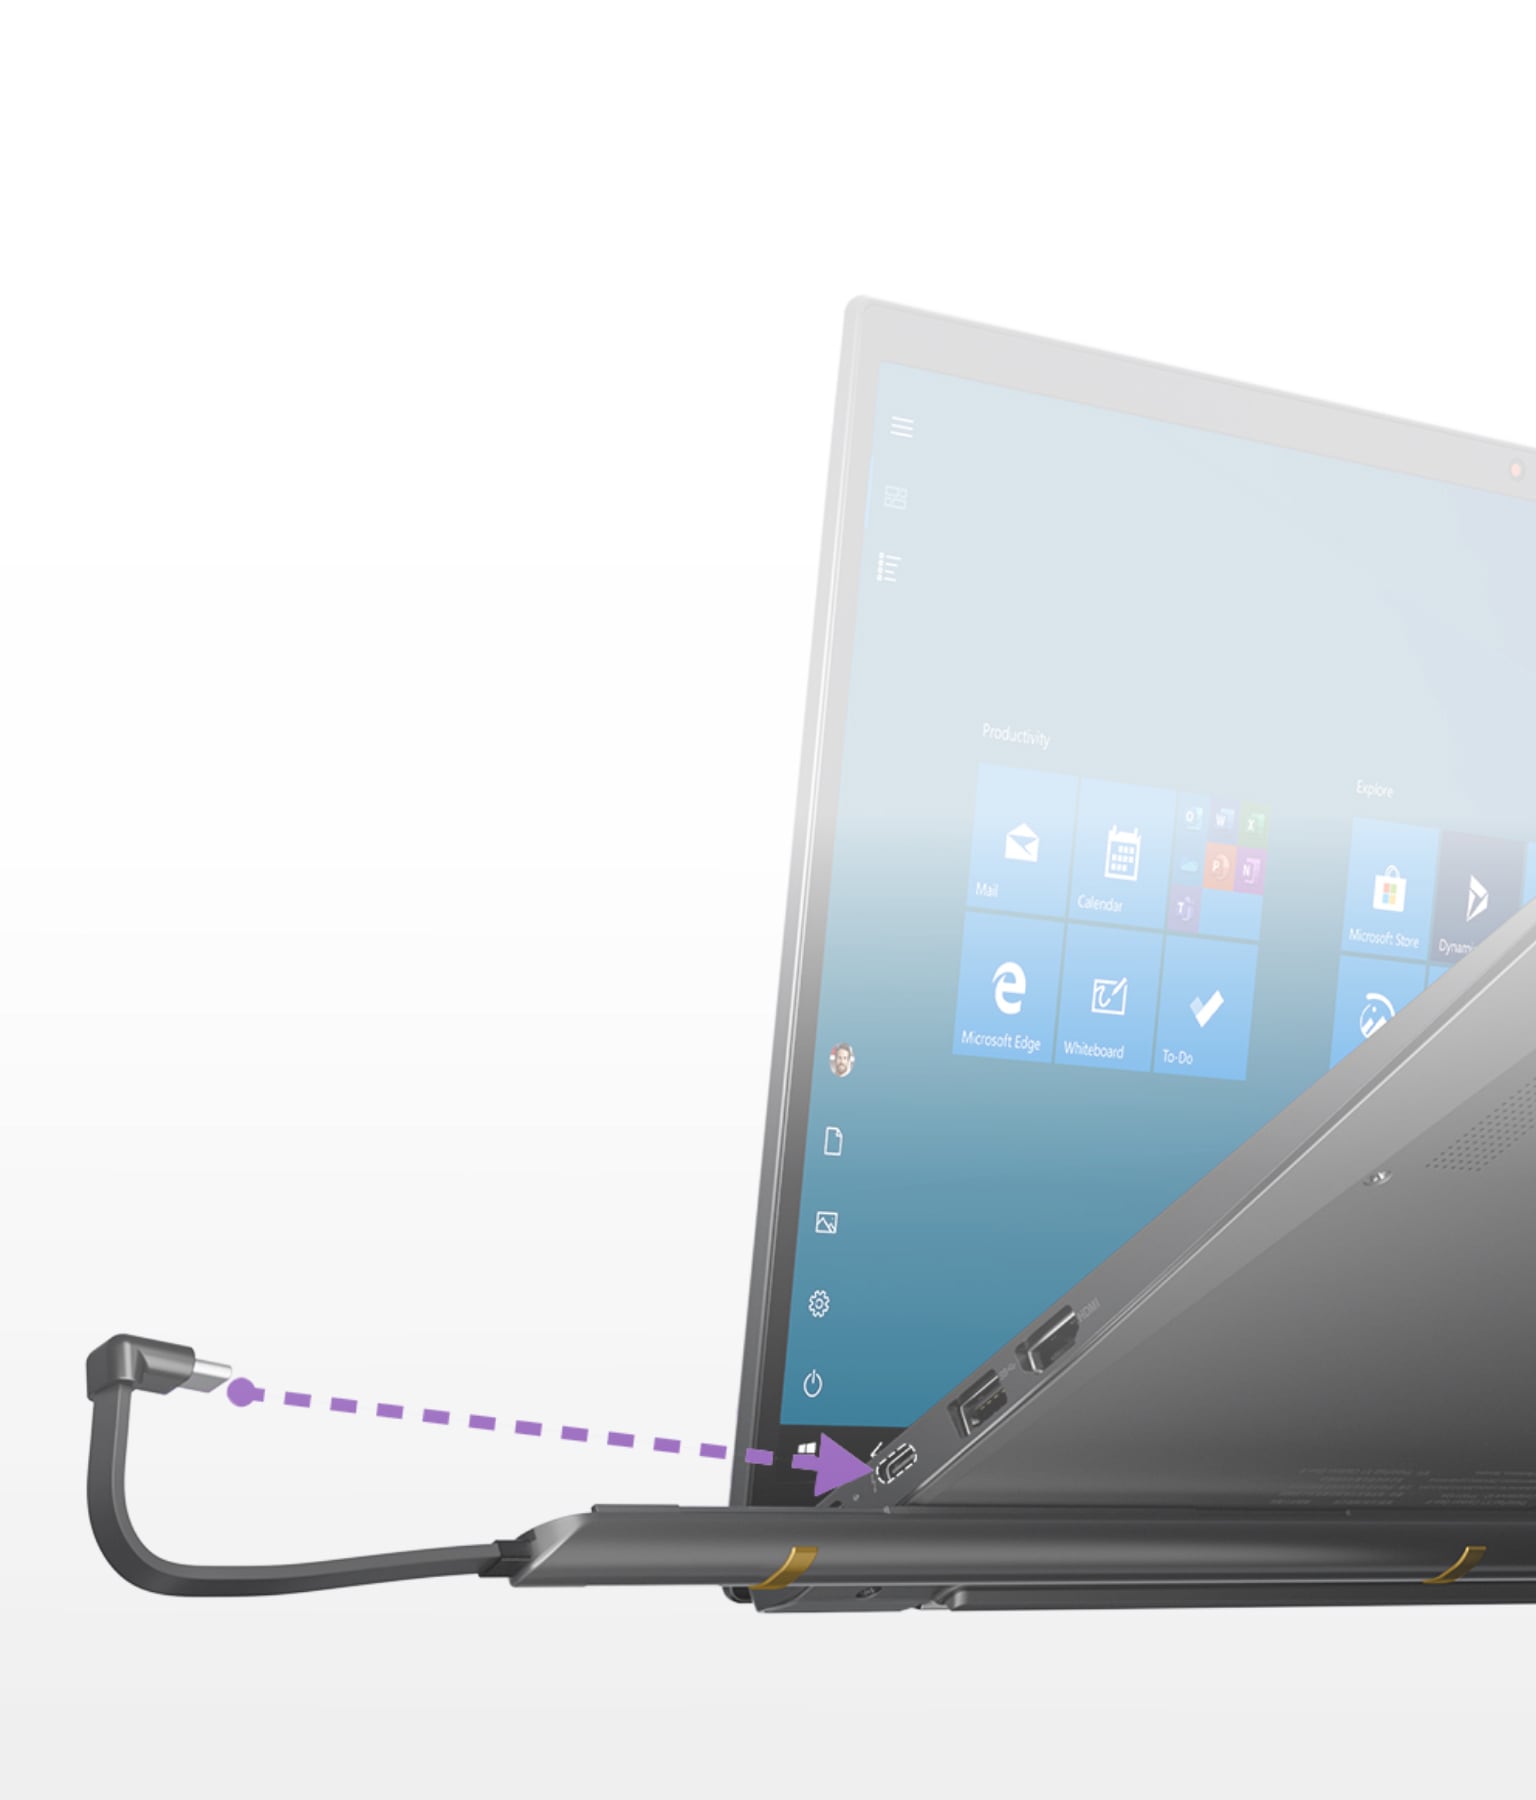 Universal wireless receiver plugging into a laptop’s USB-C port with power delivery